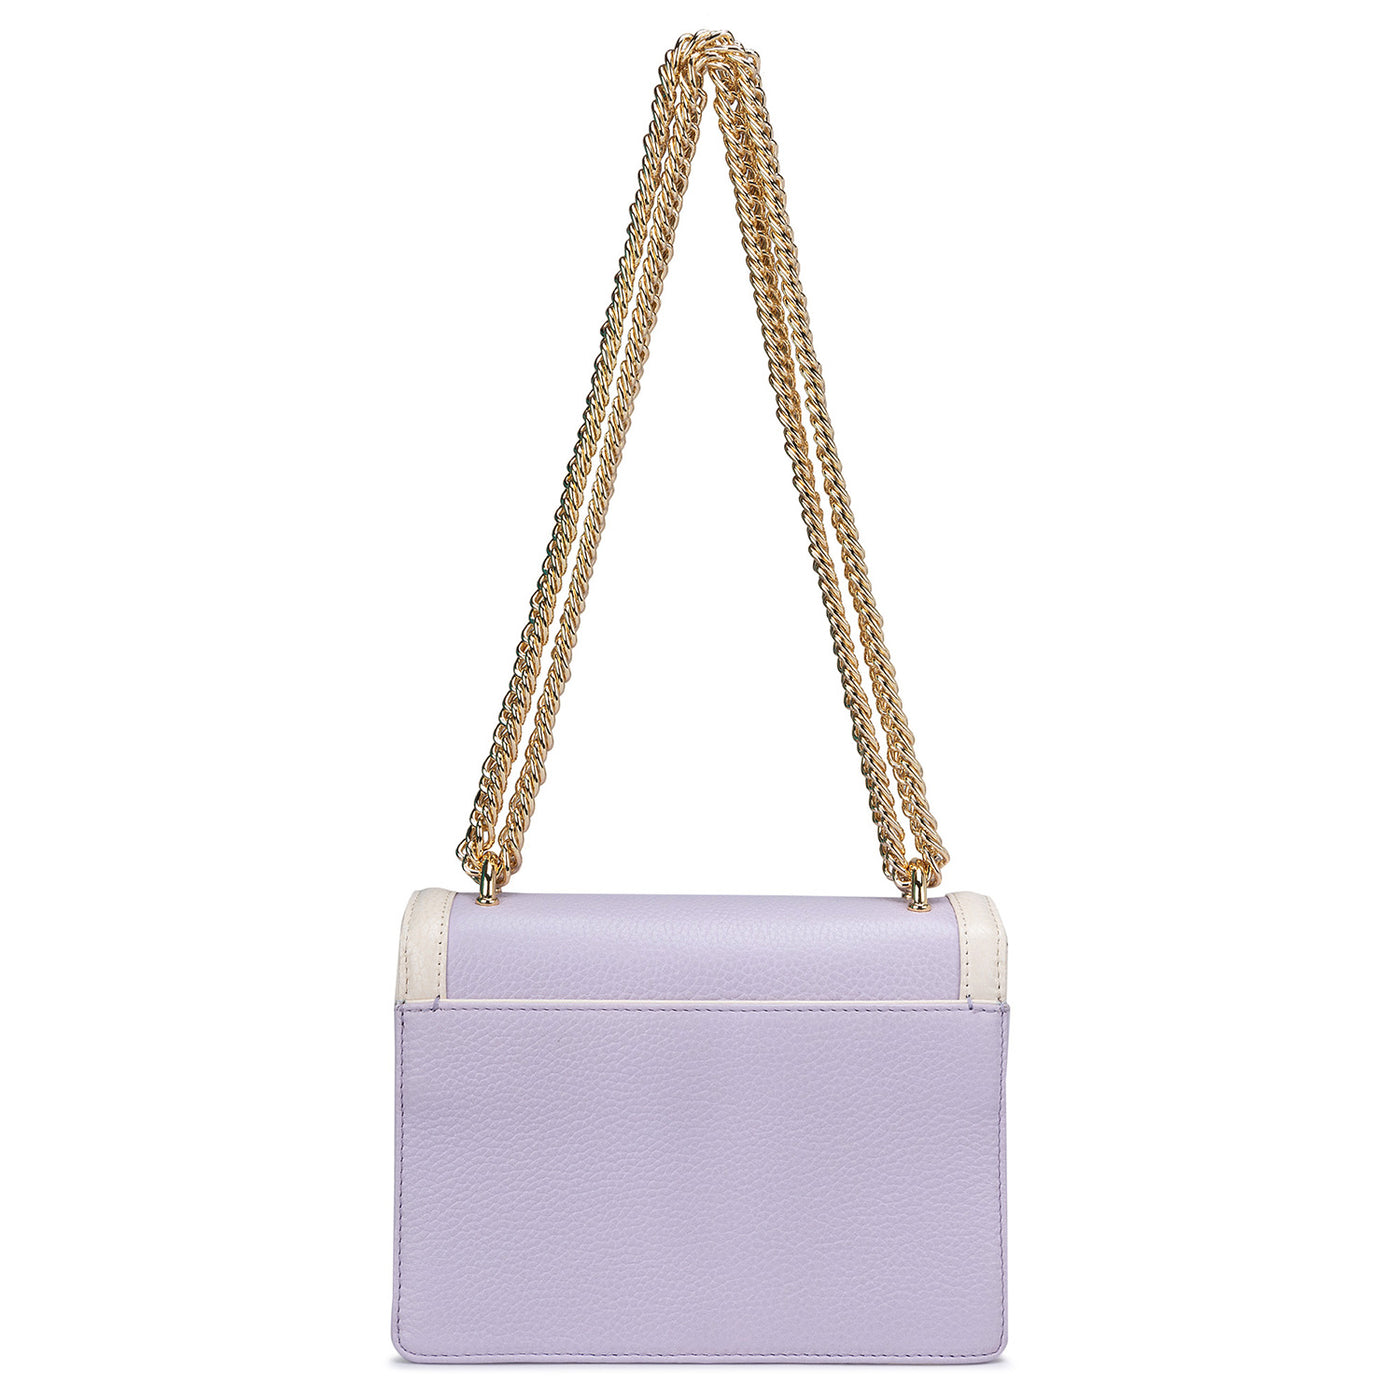 Small Wax Leather Shoulder Bag - Lilac